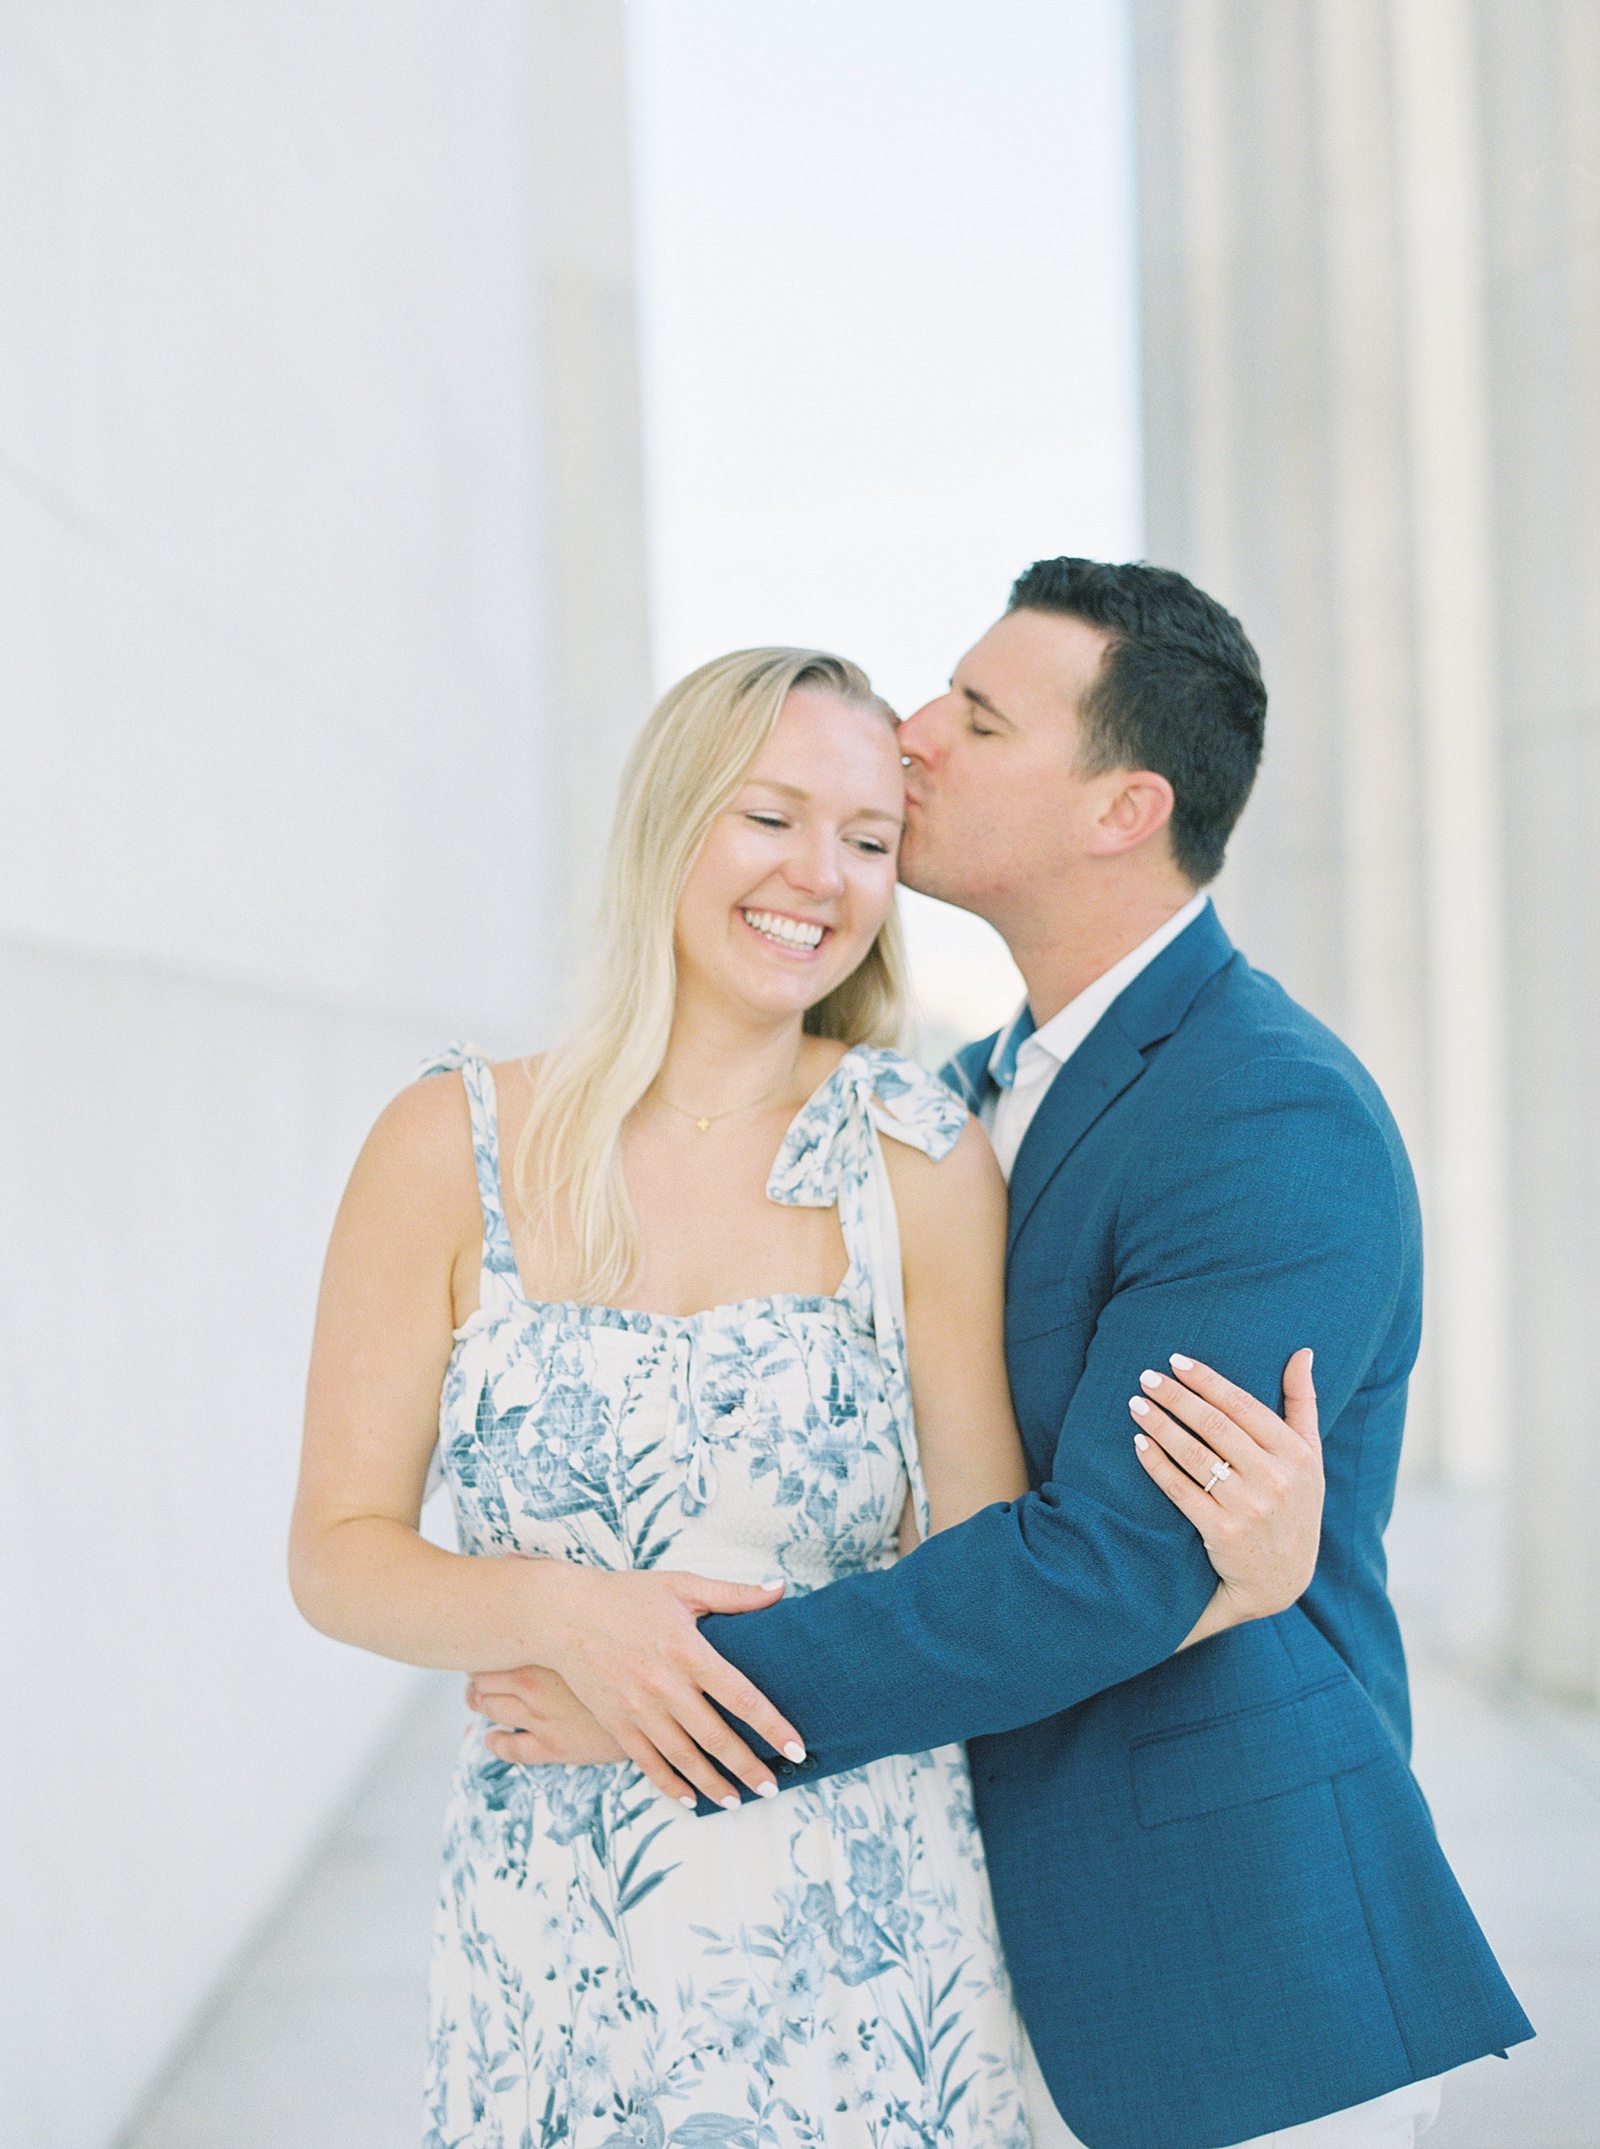 Summer Engagement Portraits at Lincoln Memorial